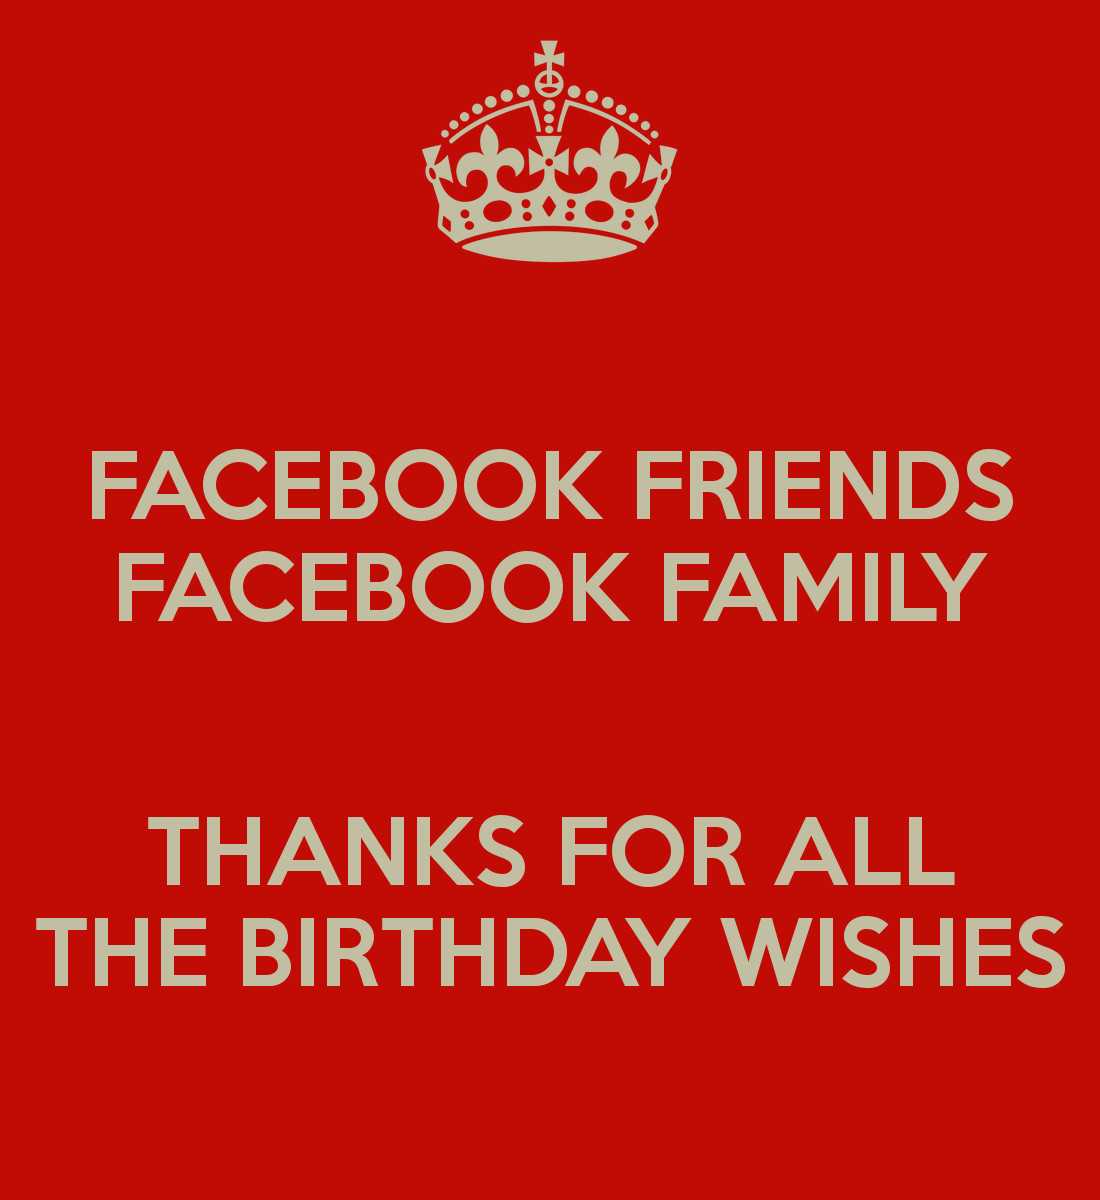 Thank You For All The Birthday Wishes Facebook
 FACEBOOK FRIENDS FACEBOOK FAMILY THANKS FOR ALL THE